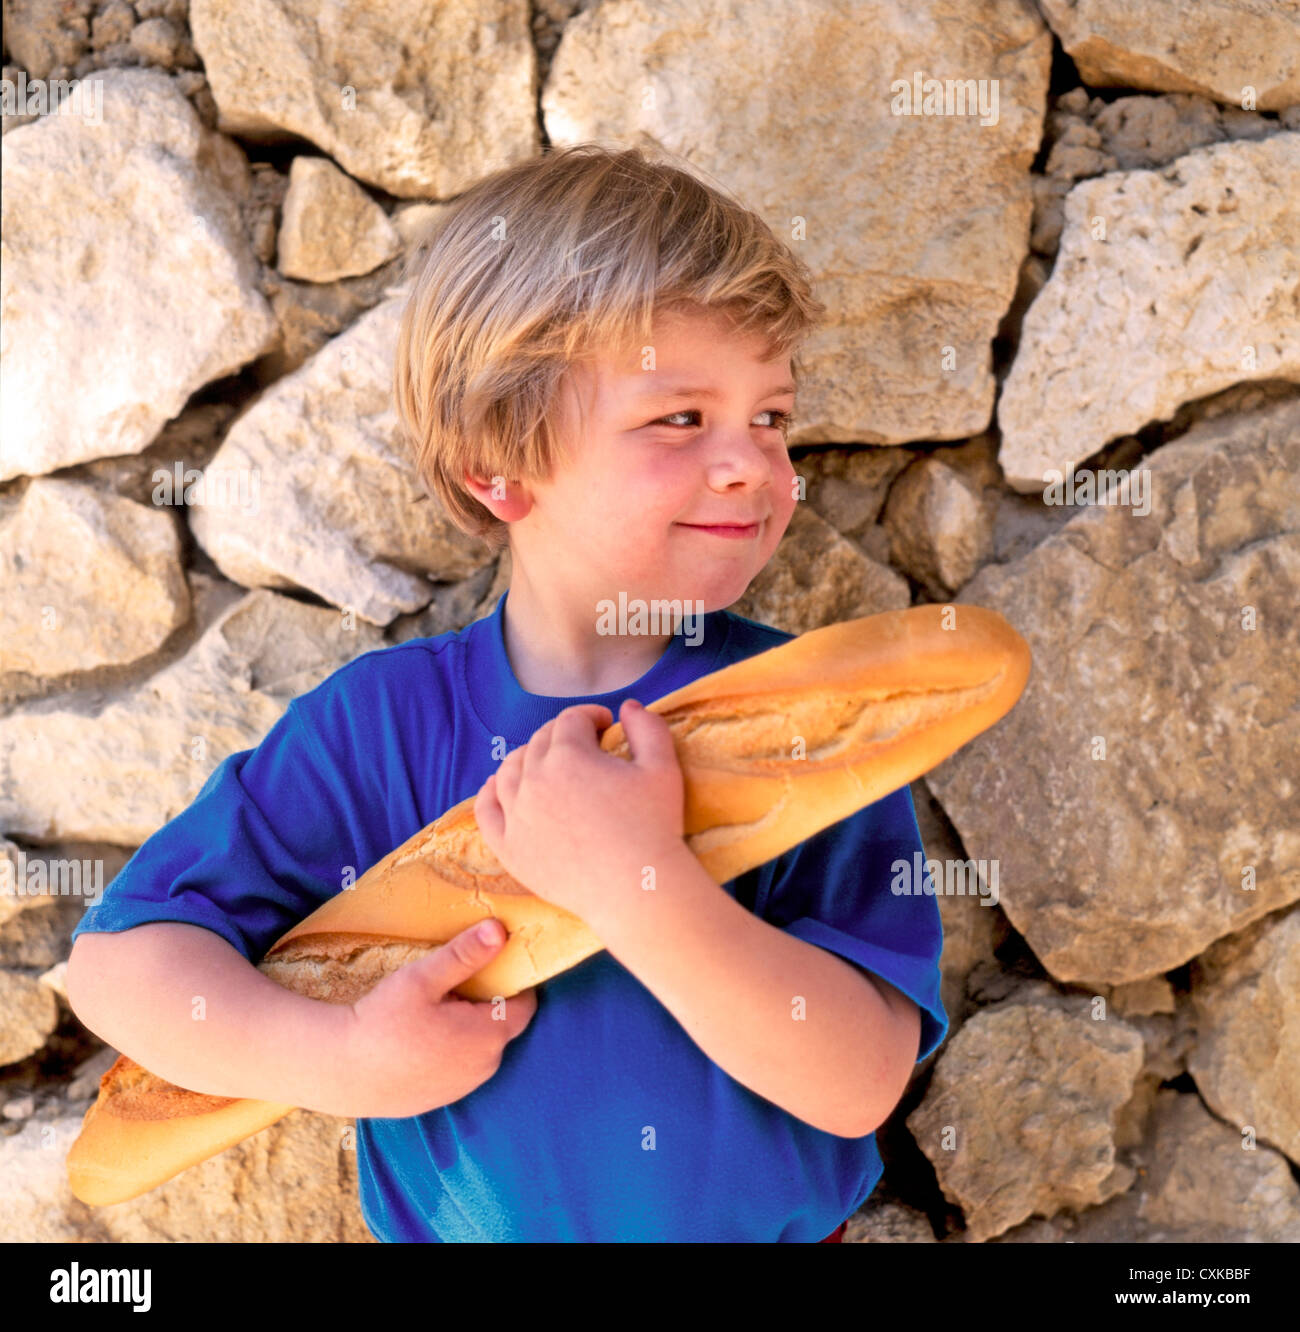 YOUNG BOY HOLDING FRENCH BREAD BAGUETTE Stock Photo